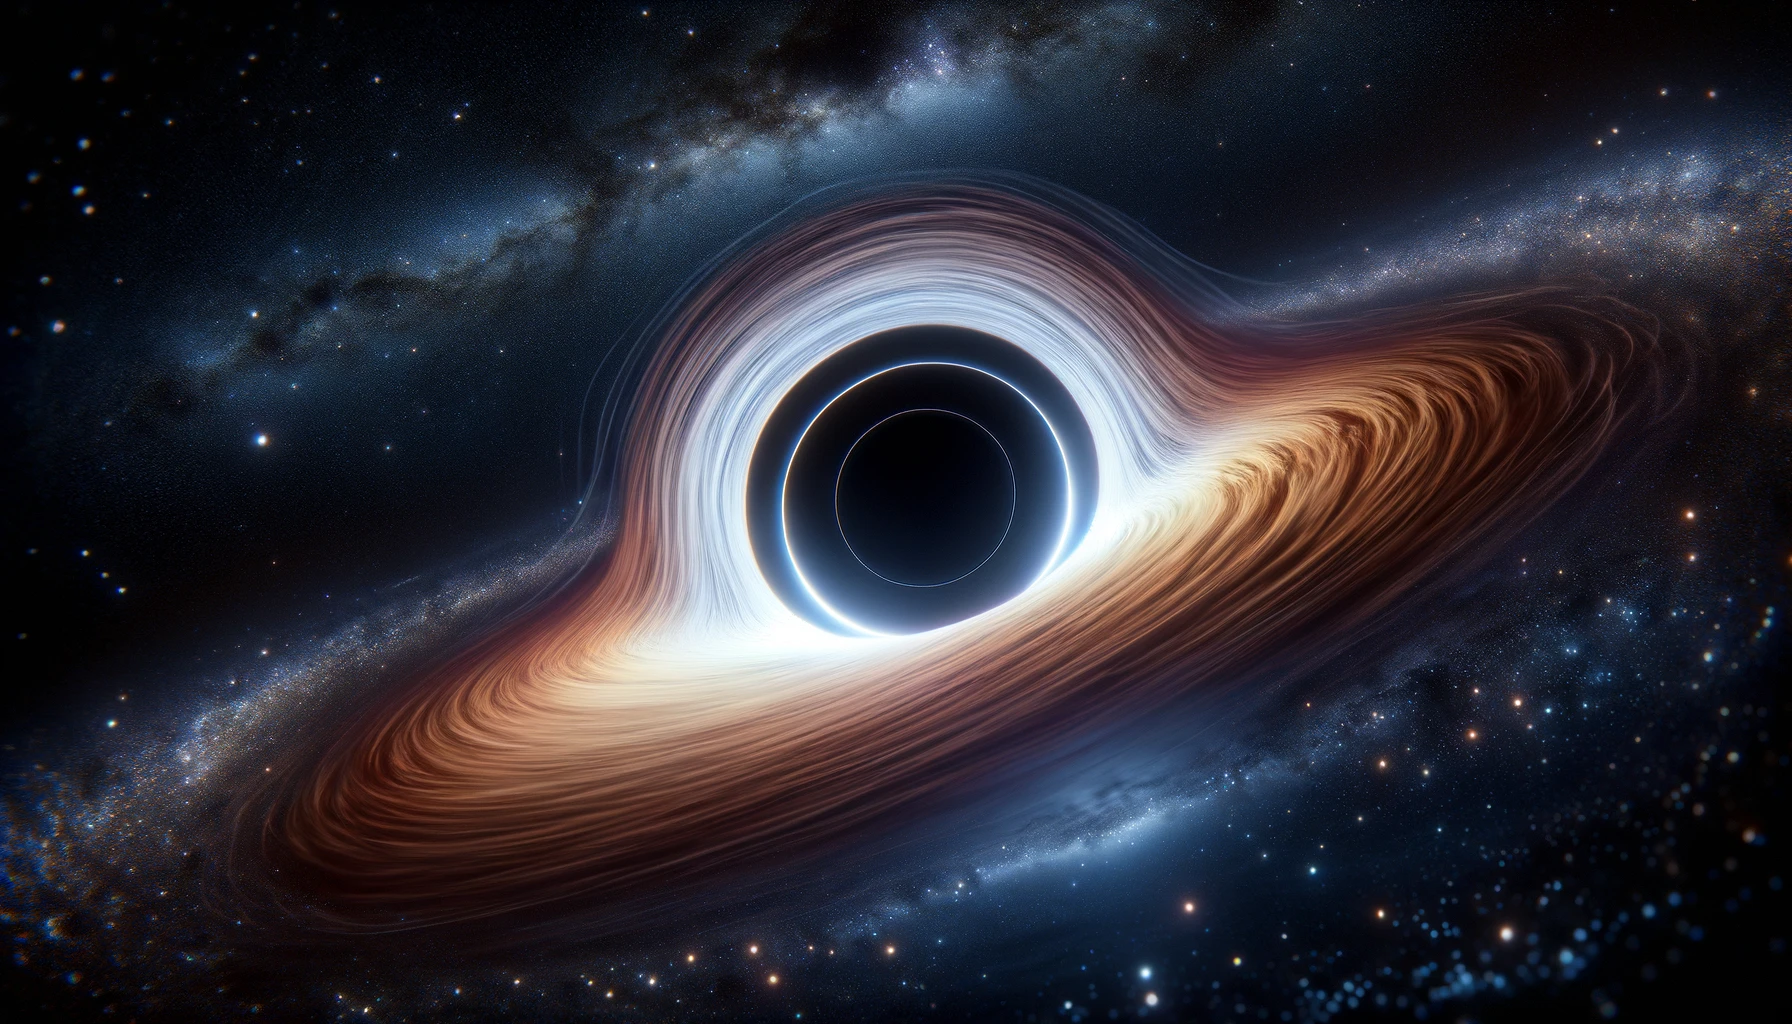 A photo-realistic image of a black hole, depicted in space. The scene captures the intense gravitational pull of the black hole, bending light around its event horizon, creating a visually stunning effect. The background is filled with stars and distant galaxies, enhancing the deep, cosmic setting. The black hole itself is not directly visible but is indicated by the distortion of light and space around it, creating a dark void in the center surrounded by a bright accretion disk. This portrayal should convey the eerie and powerful nature of black holes in the universe, with emphasis on realism and detail in the depiction of cosmic phenomena.